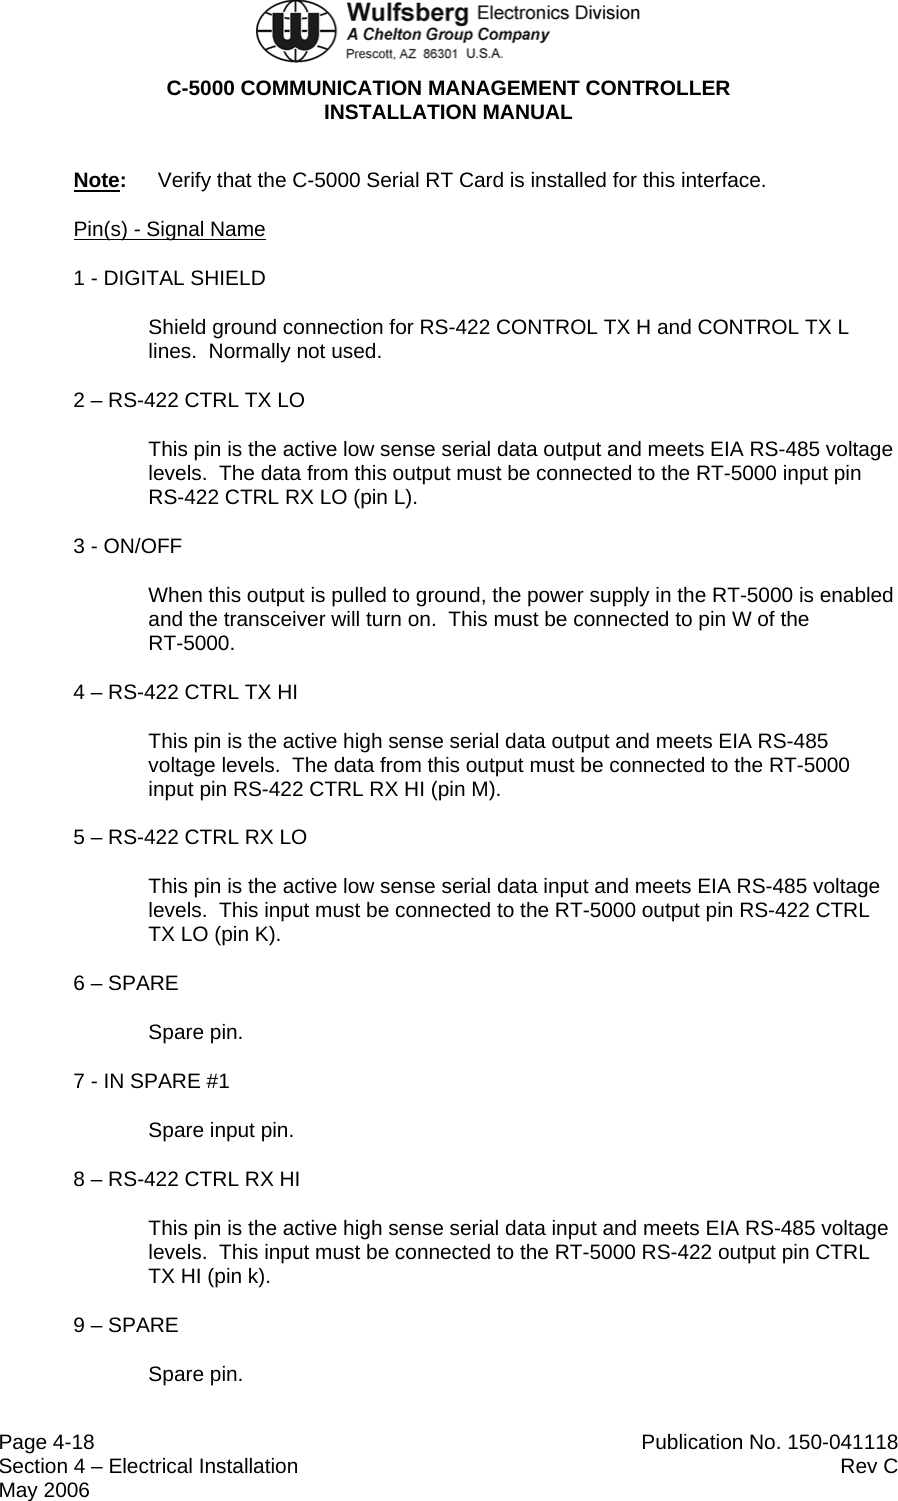  C-5000 COMMUNICATION MANAGEMENT CONTROLLER INSTALLATION MANUAL  Page 4-18  Publication No. 150-041118 Section 4 – Electrical Installation  Rev C May 2006 Note:  Verify that the C-5000 Serial RT Card is installed for this interface. Pin(s) - Signal Name 1 - DIGITAL SHIELD Shield ground connection for RS-422 CONTROL TX H and CONTROL TX L lines.  Normally not used. 2 – RS-422 CTRL TX LO This pin is the active low sense serial data output and meets EIA RS-485 voltage levels.  The data from this output must be connected to the RT-5000 input pin RS-422 CTRL RX LO (pin L). 3 - ON/OFF When this output is pulled to ground, the power supply in the RT-5000 is enabled and the transceiver will turn on.  This must be connected to pin W of the  RT-5000. 4 – RS-422 CTRL TX HI This pin is the active high sense serial data output and meets EIA RS-485 voltage levels.  The data from this output must be connected to the RT-5000 input pin RS-422 CTRL RX HI (pin M). 5 – RS-422 CTRL RX LO This pin is the active low sense serial data input and meets EIA RS-485 voltage levels.  This input must be connected to the RT-5000 output pin RS-422 CTRL TX LO (pin K). 6 – SPARE Spare pin. 7 - IN SPARE #1 Spare input pin. 8 – RS-422 CTRL RX HI This pin is the active high sense serial data input and meets EIA RS-485 voltage levels.  This input must be connected to the RT-5000 RS-422 output pin CTRL TX HI (pin k). 9 – SPARE Spare pin. 